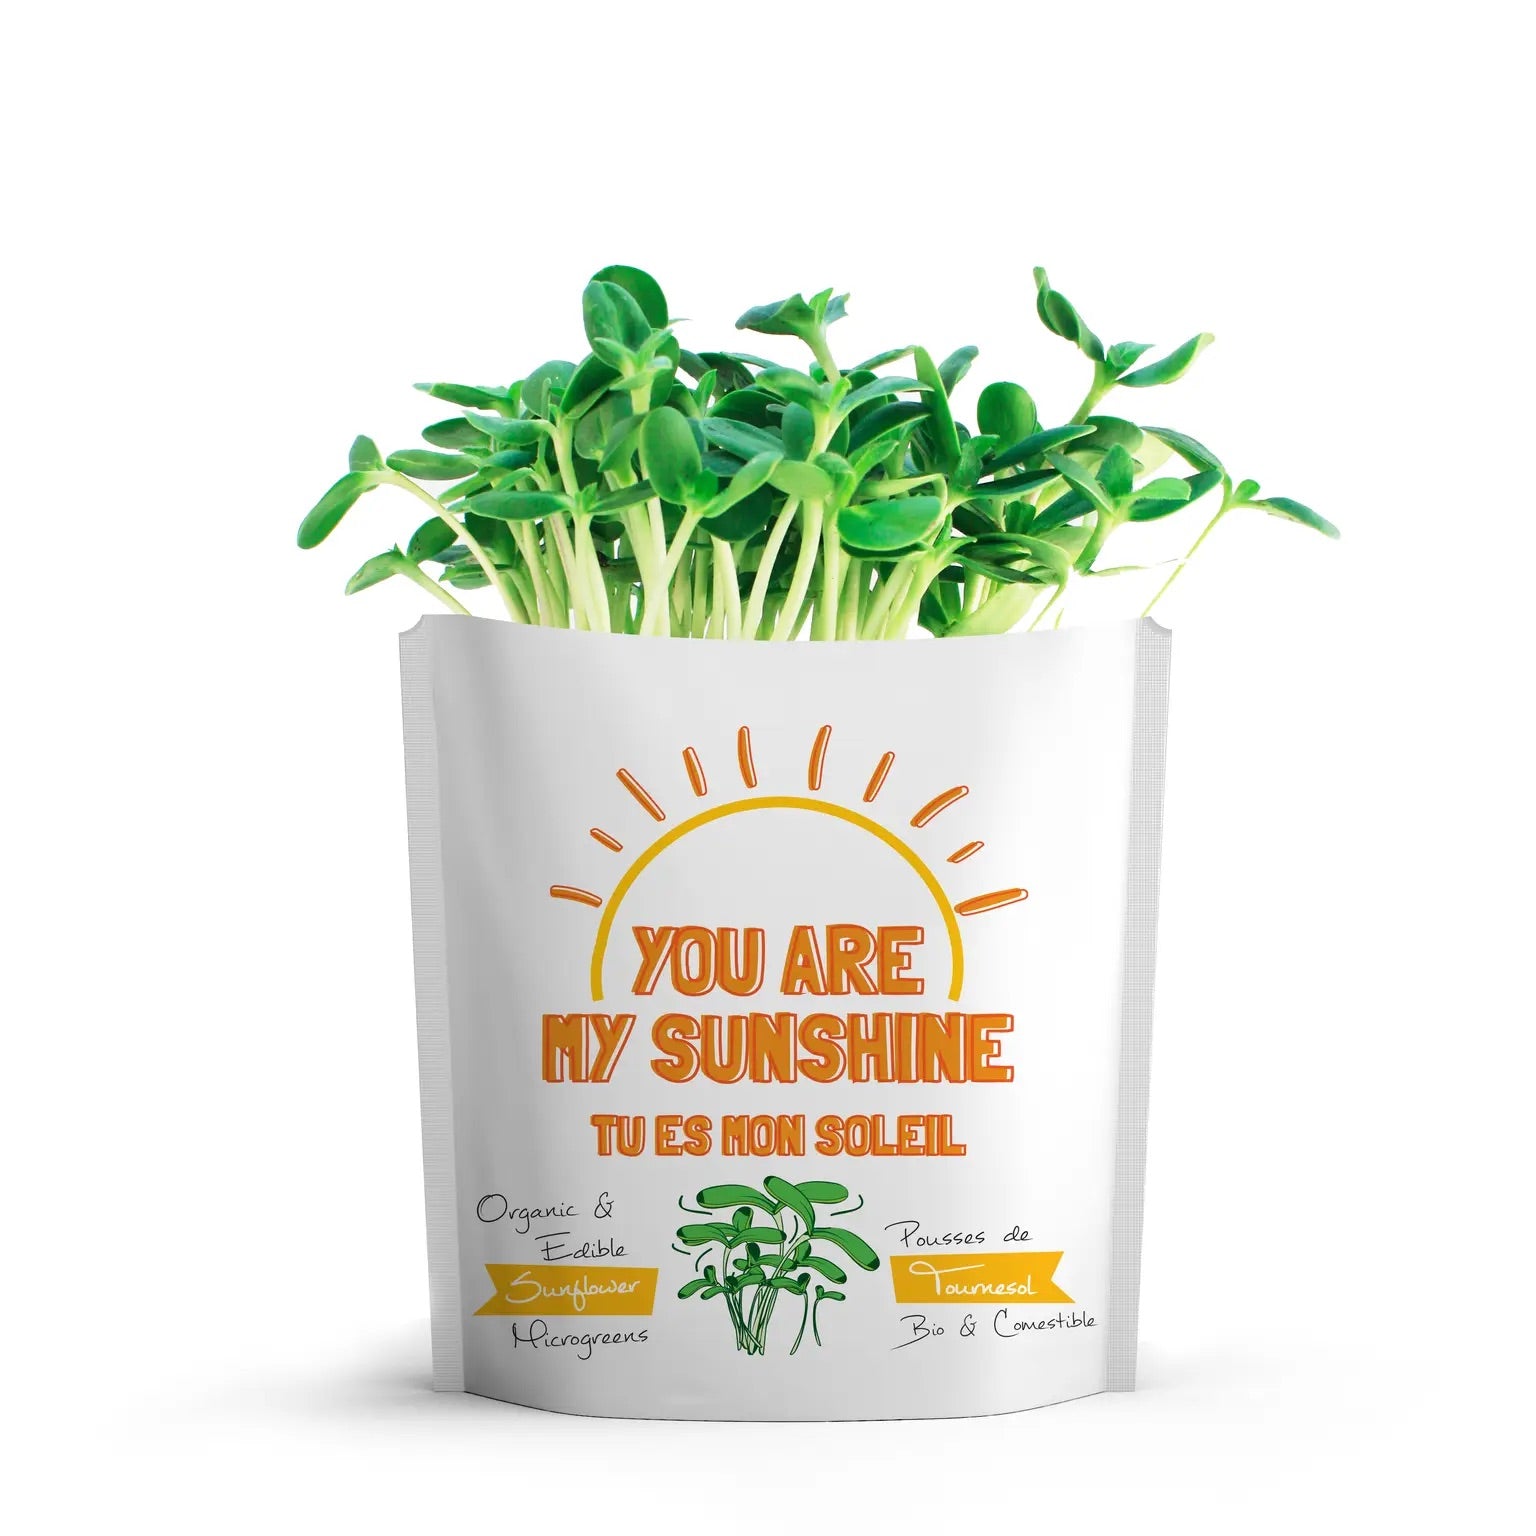 Gift a Green - You Are My Sunshine Pouch